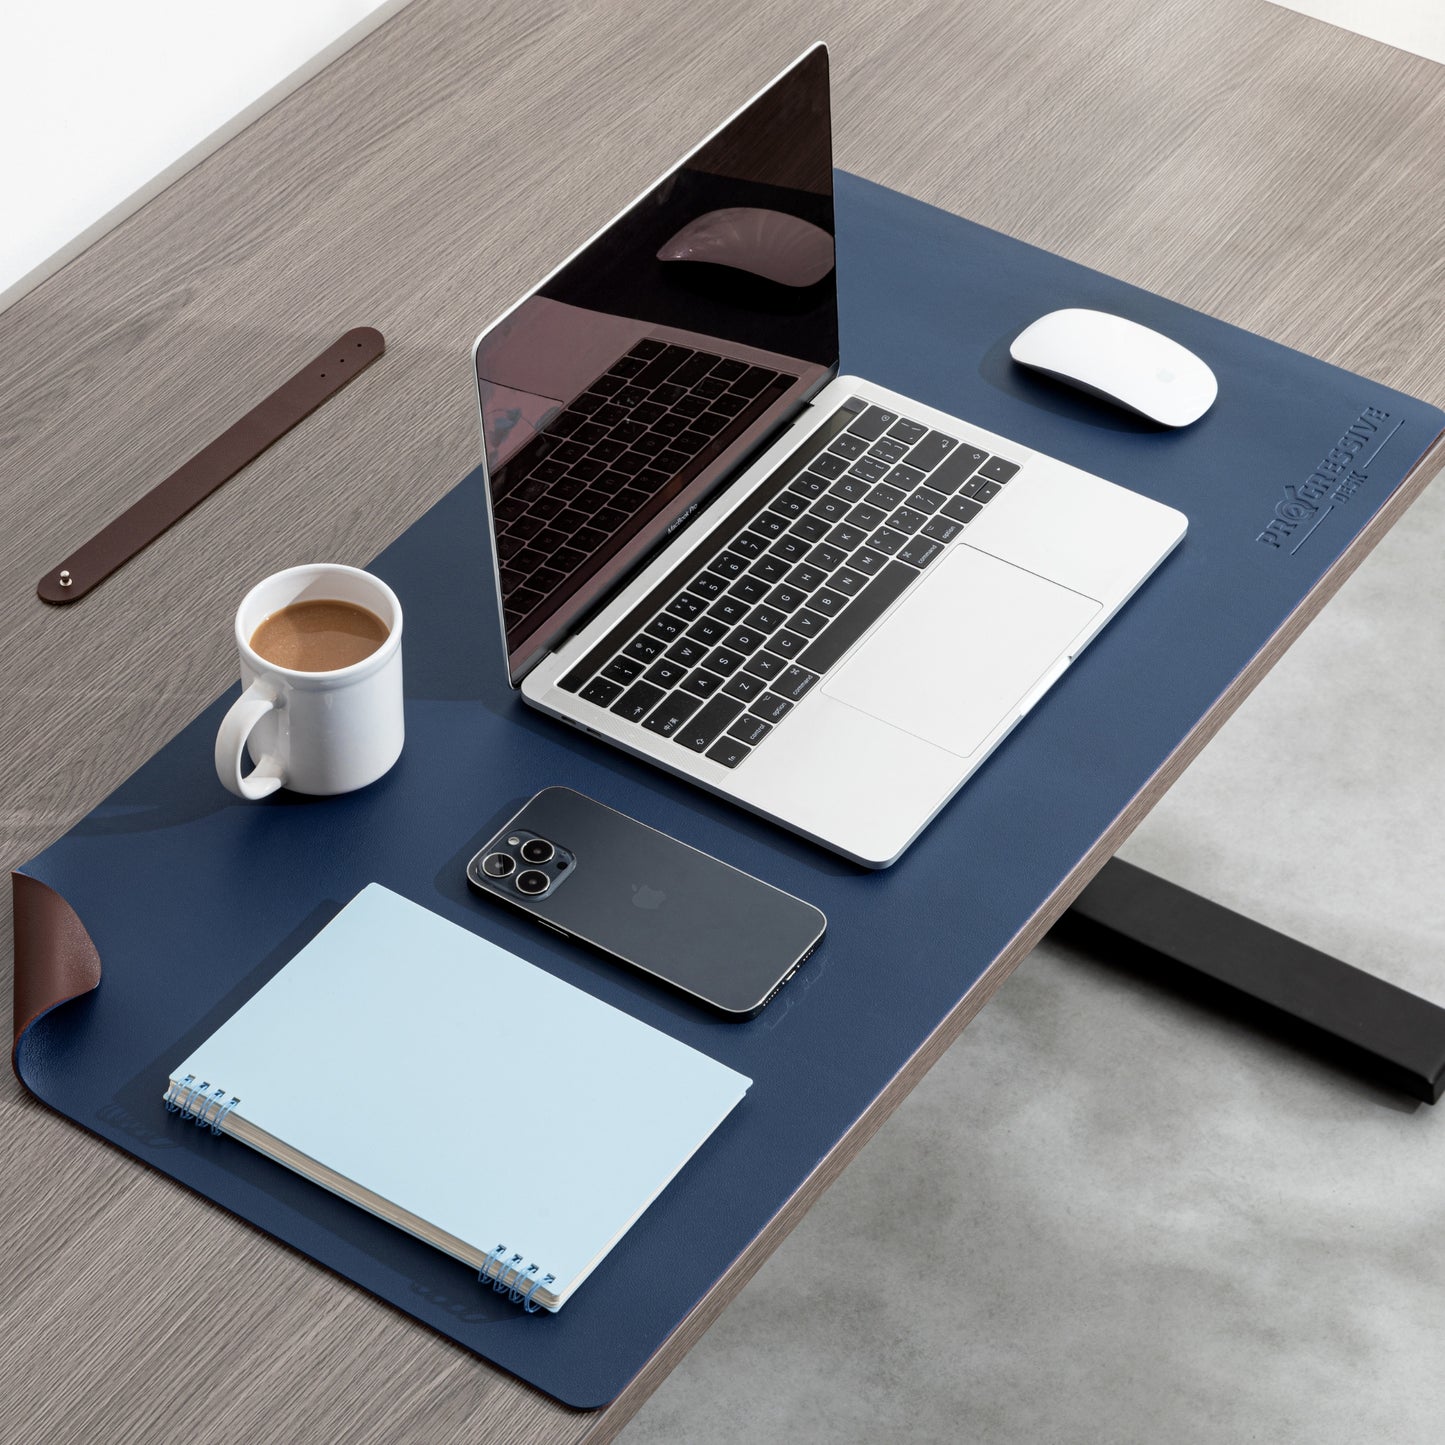 Mavigadget on X: Product: Nordic Minimalist Leather Waterproof Table  Protector Mat⁠  #monday #tuesday #wednesday  #thursday #friday #saturday #sunday  / X